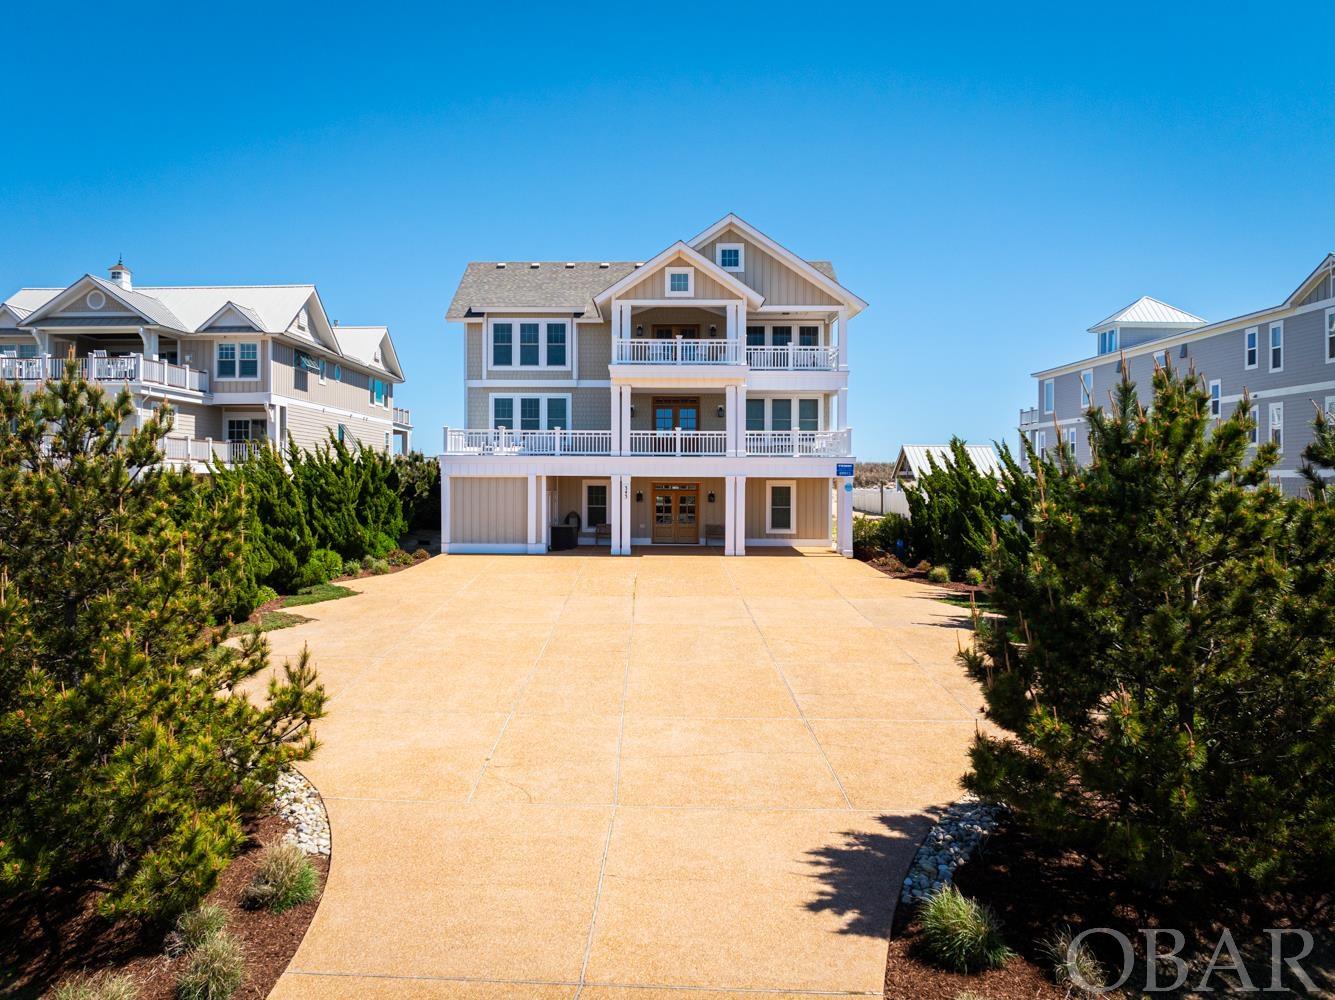 Welcome to 'Island Paradise.' Step inside, escape the ordinary and immerse yourself in a realm of opulence within this 11,800 square foot 12-bedroom oceanfront retreat nestled in the highly coveted Pine Island Reserve community of Corolla. Built by renown local Outer Banks Builder Olin Finch, Island Paradise is perfectly designed to host family vacations, corporate retreats or weddings, and exhibits an established and consistent rental history. Tranquility and rejuvenation await you within these walls, while expansive composite decks grace the exterior, overlooking the Atlantic Ocean sunrises to the east and the scenic sunsets of the Currituck Sound/Audubon Nature Preserve to the west. Marvel at breathtaking panoramic ocean views on the third level, where an expansive open layout offers sweeping vistas from the ocean living area, dining space, and large screened-in porch. On this level you will also find three master bedrooms, a sunset lounge room with custom Boat Bar overlooking to Audubon Nature Preserve, a half-bathroom, and a convenient elevator access servicing all levels. The second level boasts six additional master bedrooms, with an Oceanfront Lounge offering a serene retreat to unwind or enjoy private moments with loved ones, all within arm's reach of the coffee bar for refreshments. On the first floor, you'll find three more master bedrooms along with world-class entertainment havens and a pool bar room. A Theater Room equipped with NEW luxurious leather power reclining seats awaits the movie lovers, while the Arcade Room offers new & old era classics like Pacman, Big Buck Hunter, etc. A rec room featuring a pool table, shuffleboard table and a spacious Sports-Bar-style bar area leads out to a remarkable outdoor sanctuary complete with a covered outdoor kitchen, NEW poolside Tiki Hut, a half-bathroom, dining area, and large screened in lounge. While the mesmerizing ocean beckons just steps away via a private walkway, the custom pool stands as a serene retreat in its own right. Soak up some sunshine in the shallow lounging zone, warm up in the infinity-edge spa, or swim up to the poolside bar and enjoy a refreshing beverage. Showcasing itself as a proven rental investment, this home accepts rental bookings more than 51 weeks in advance. Full list of updates available upon request.